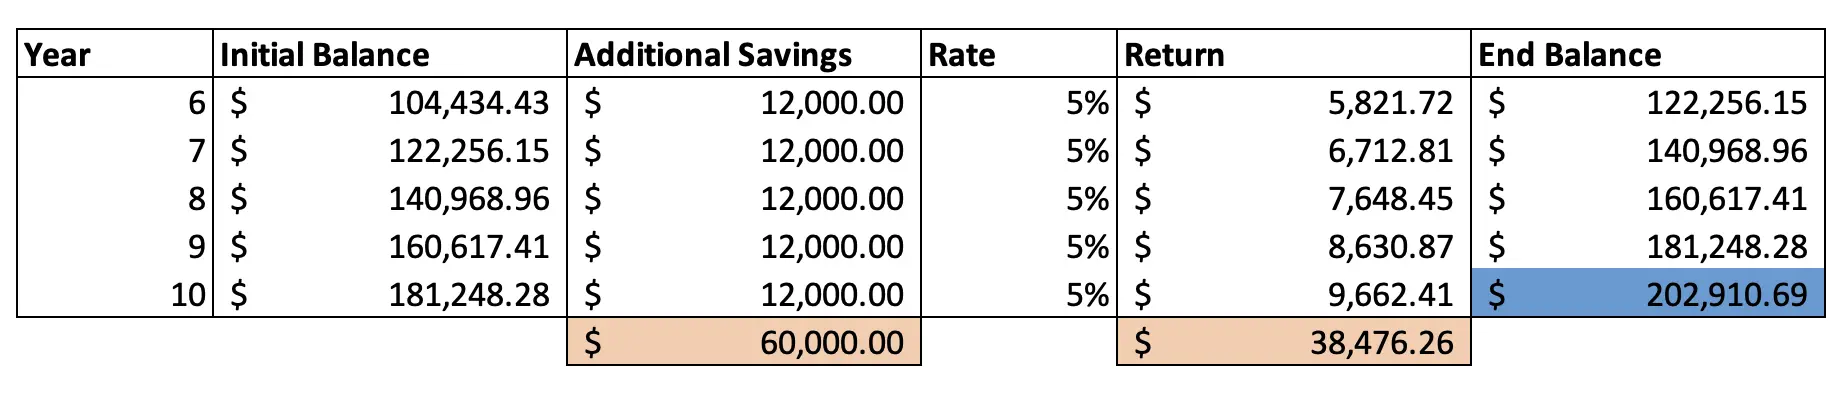 $200,000 in 10 years by saving $18,000 a year with a 5% return for 5 years and then $12,000 a year for the next 5 years